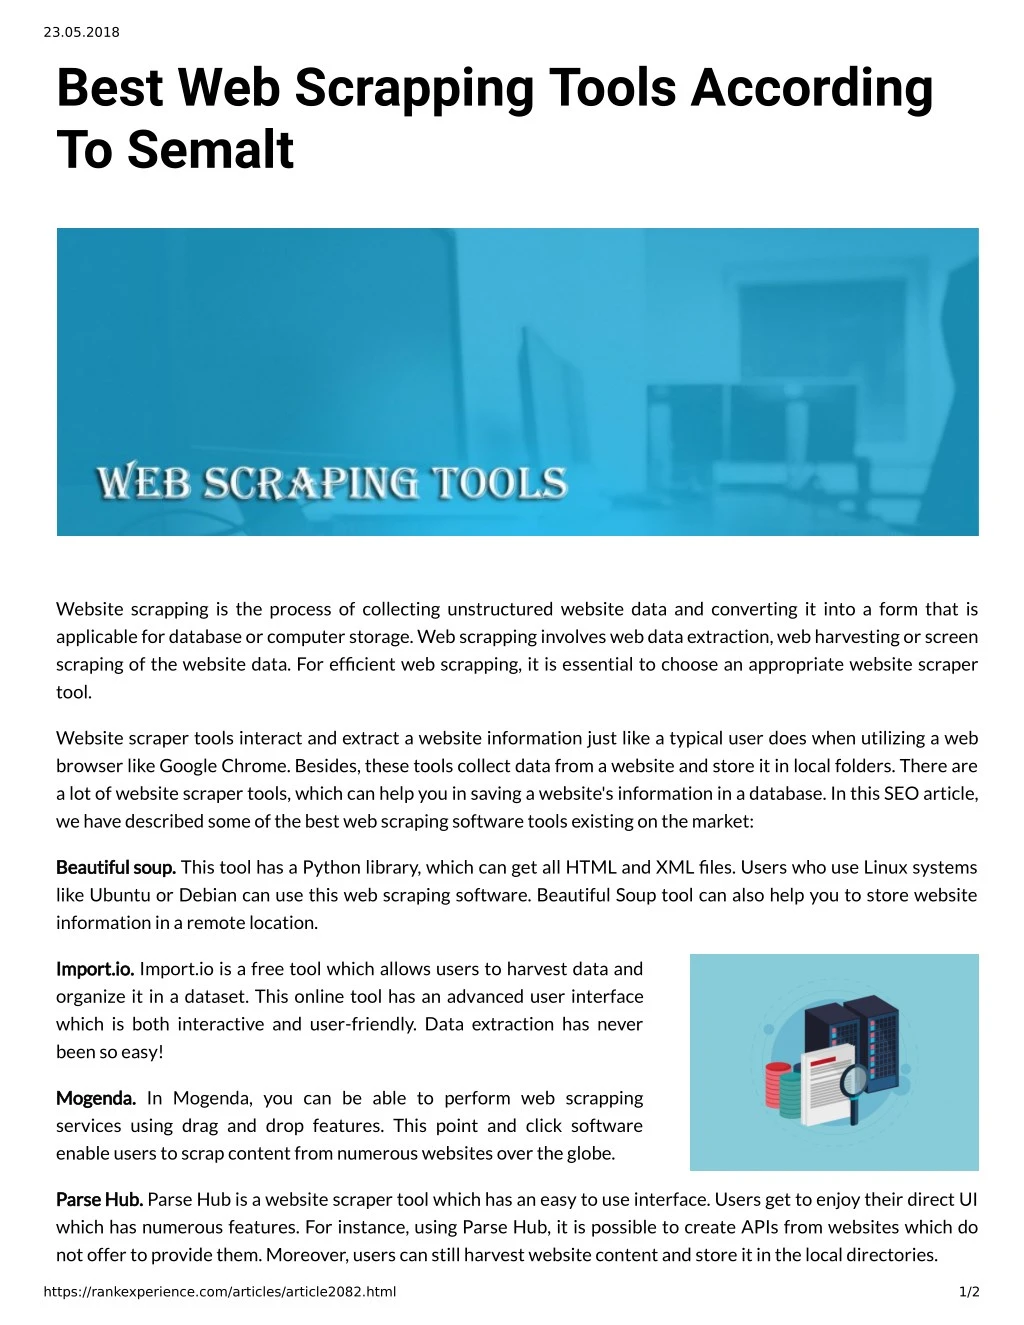 23 05 2018 best web scrapping tools according